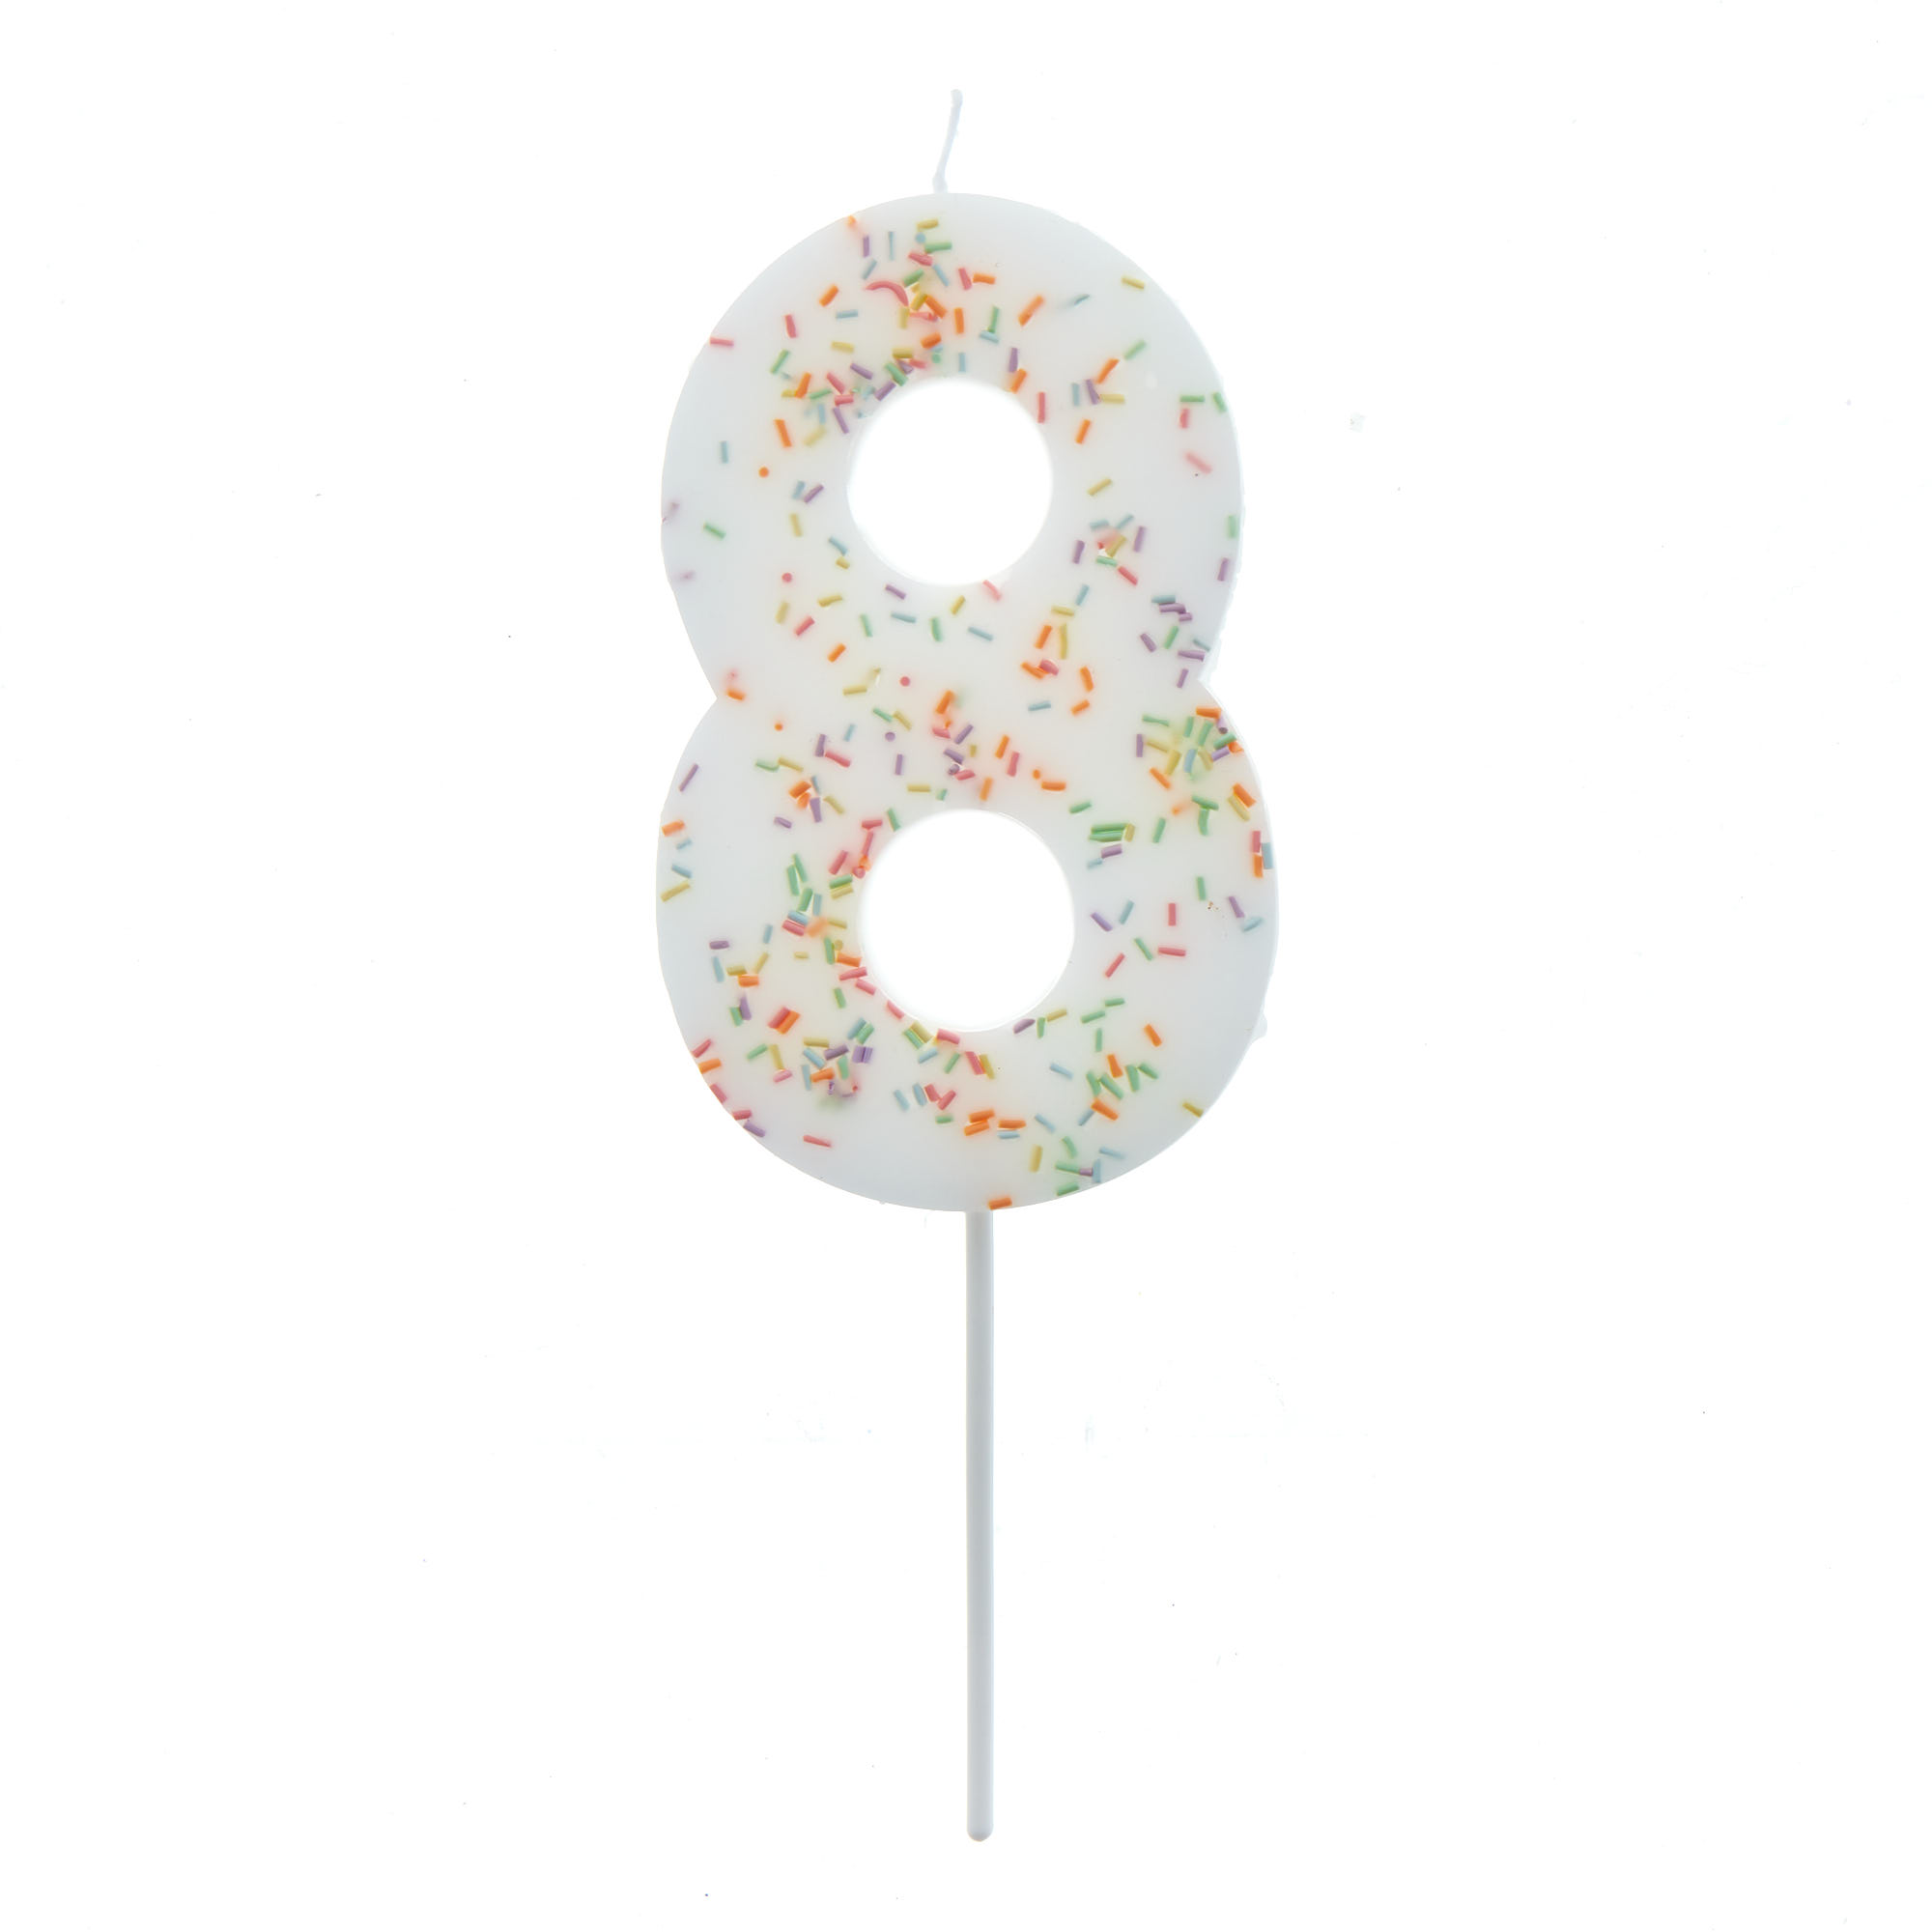 Buy Jumbo Number '8' Sprinkle Candle for GBP 2.99 | Card Factory UK